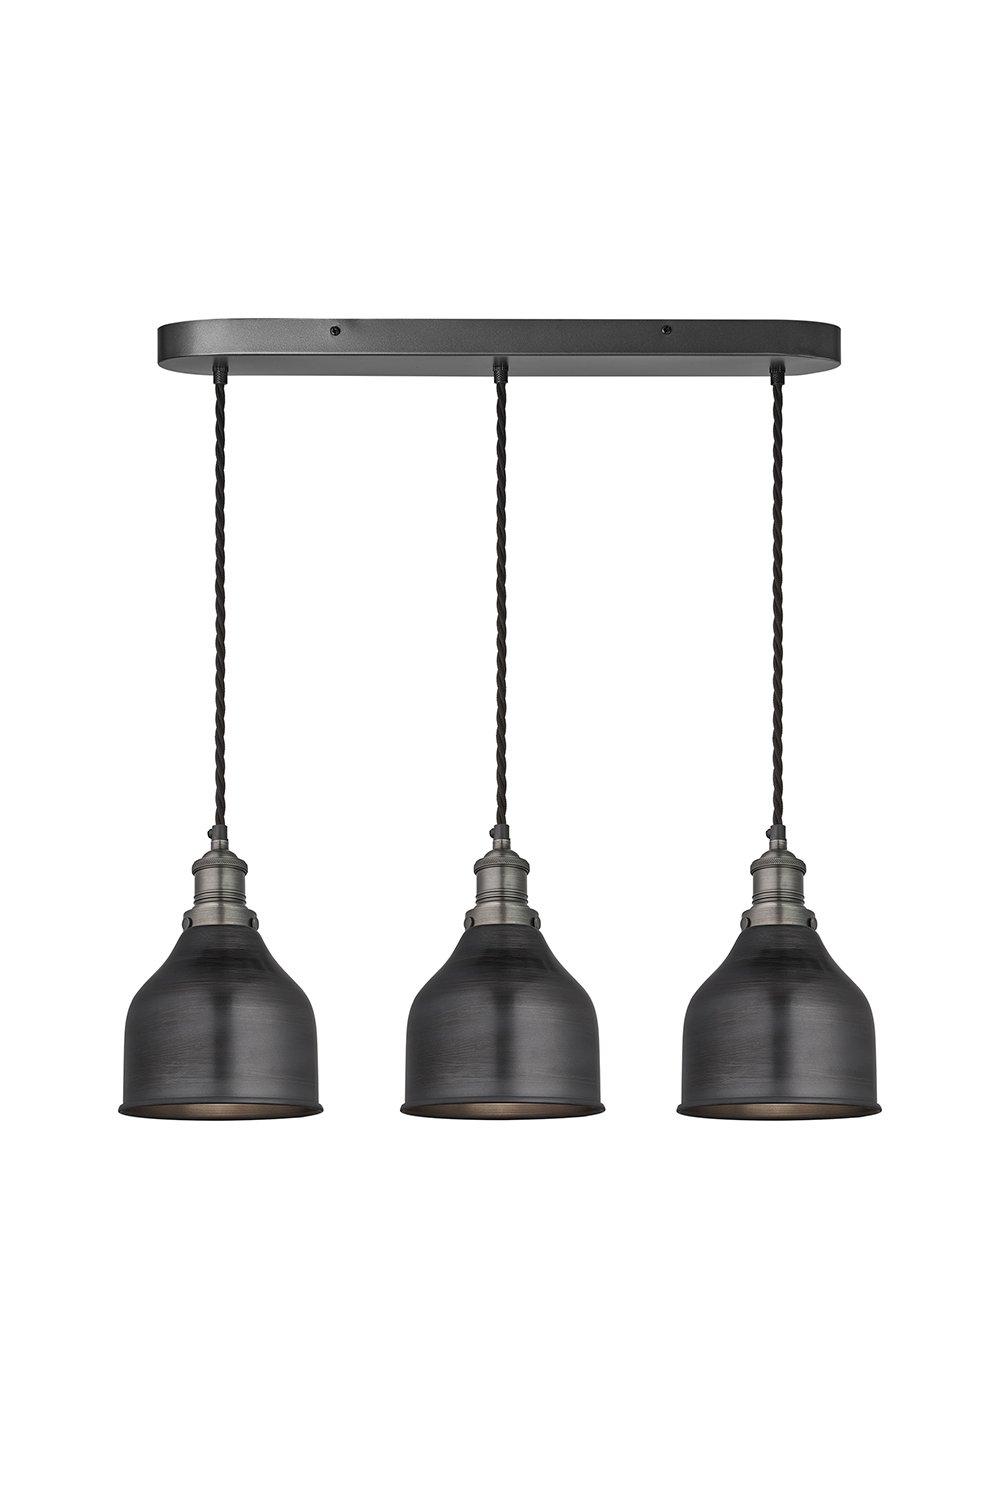 Brooklyn Cone 3 Wire Oval Cluster Lights, 7 inch, Pewter, Pewter holder